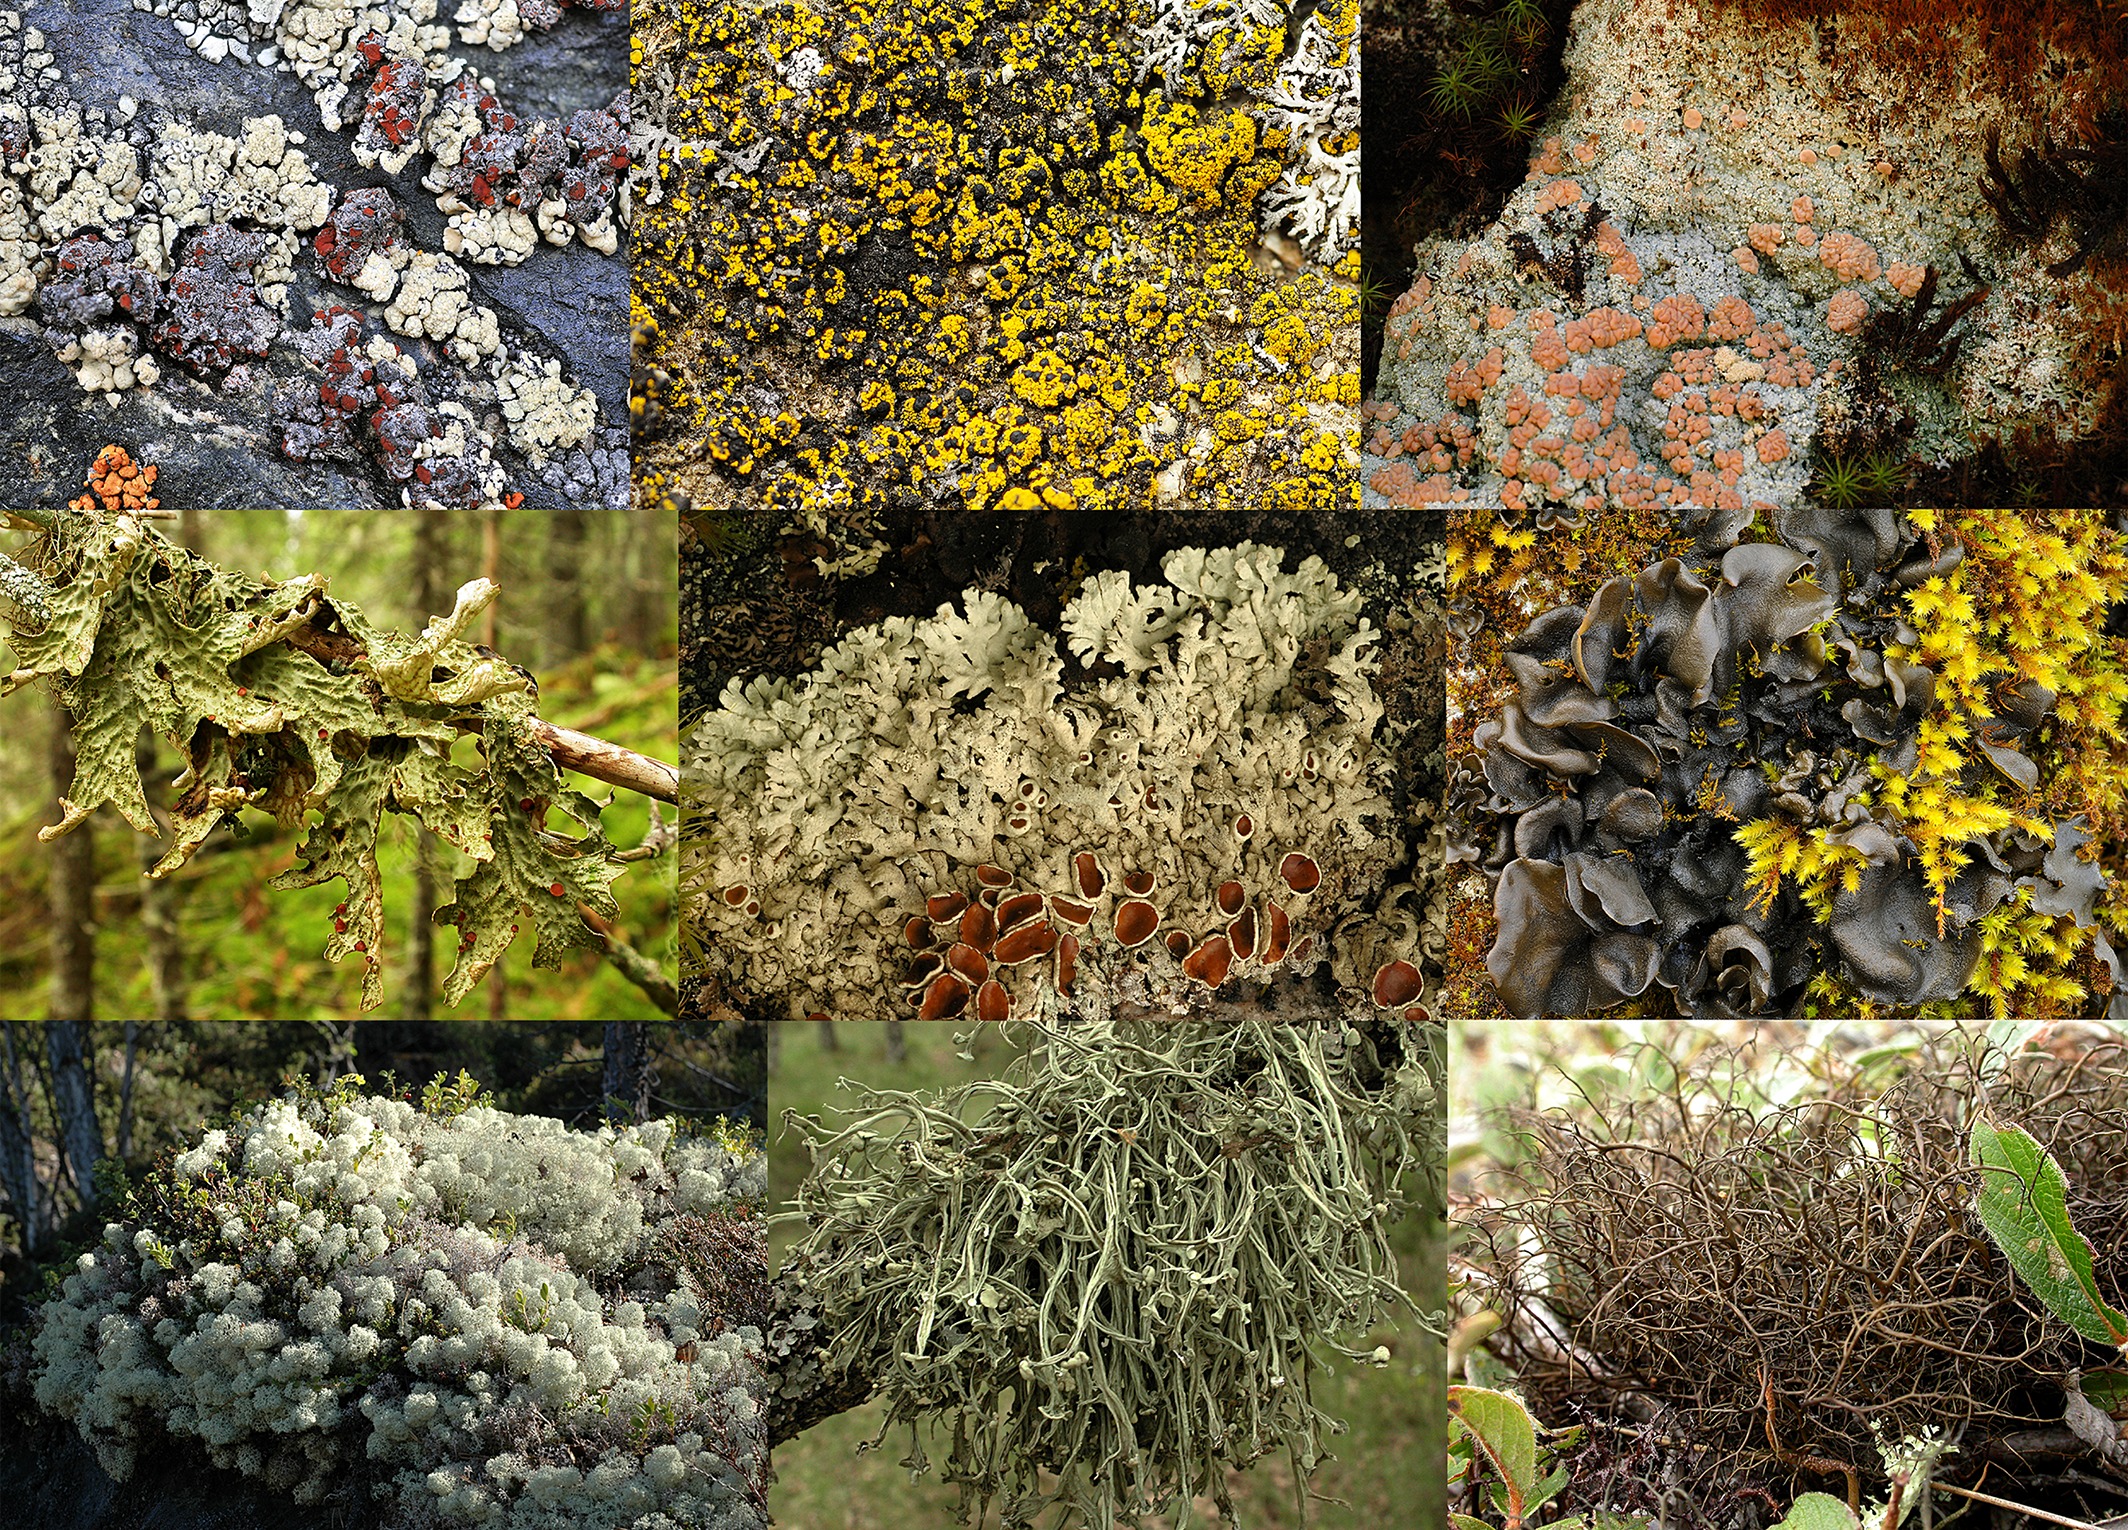 Lichens on various terrestrial surfaces